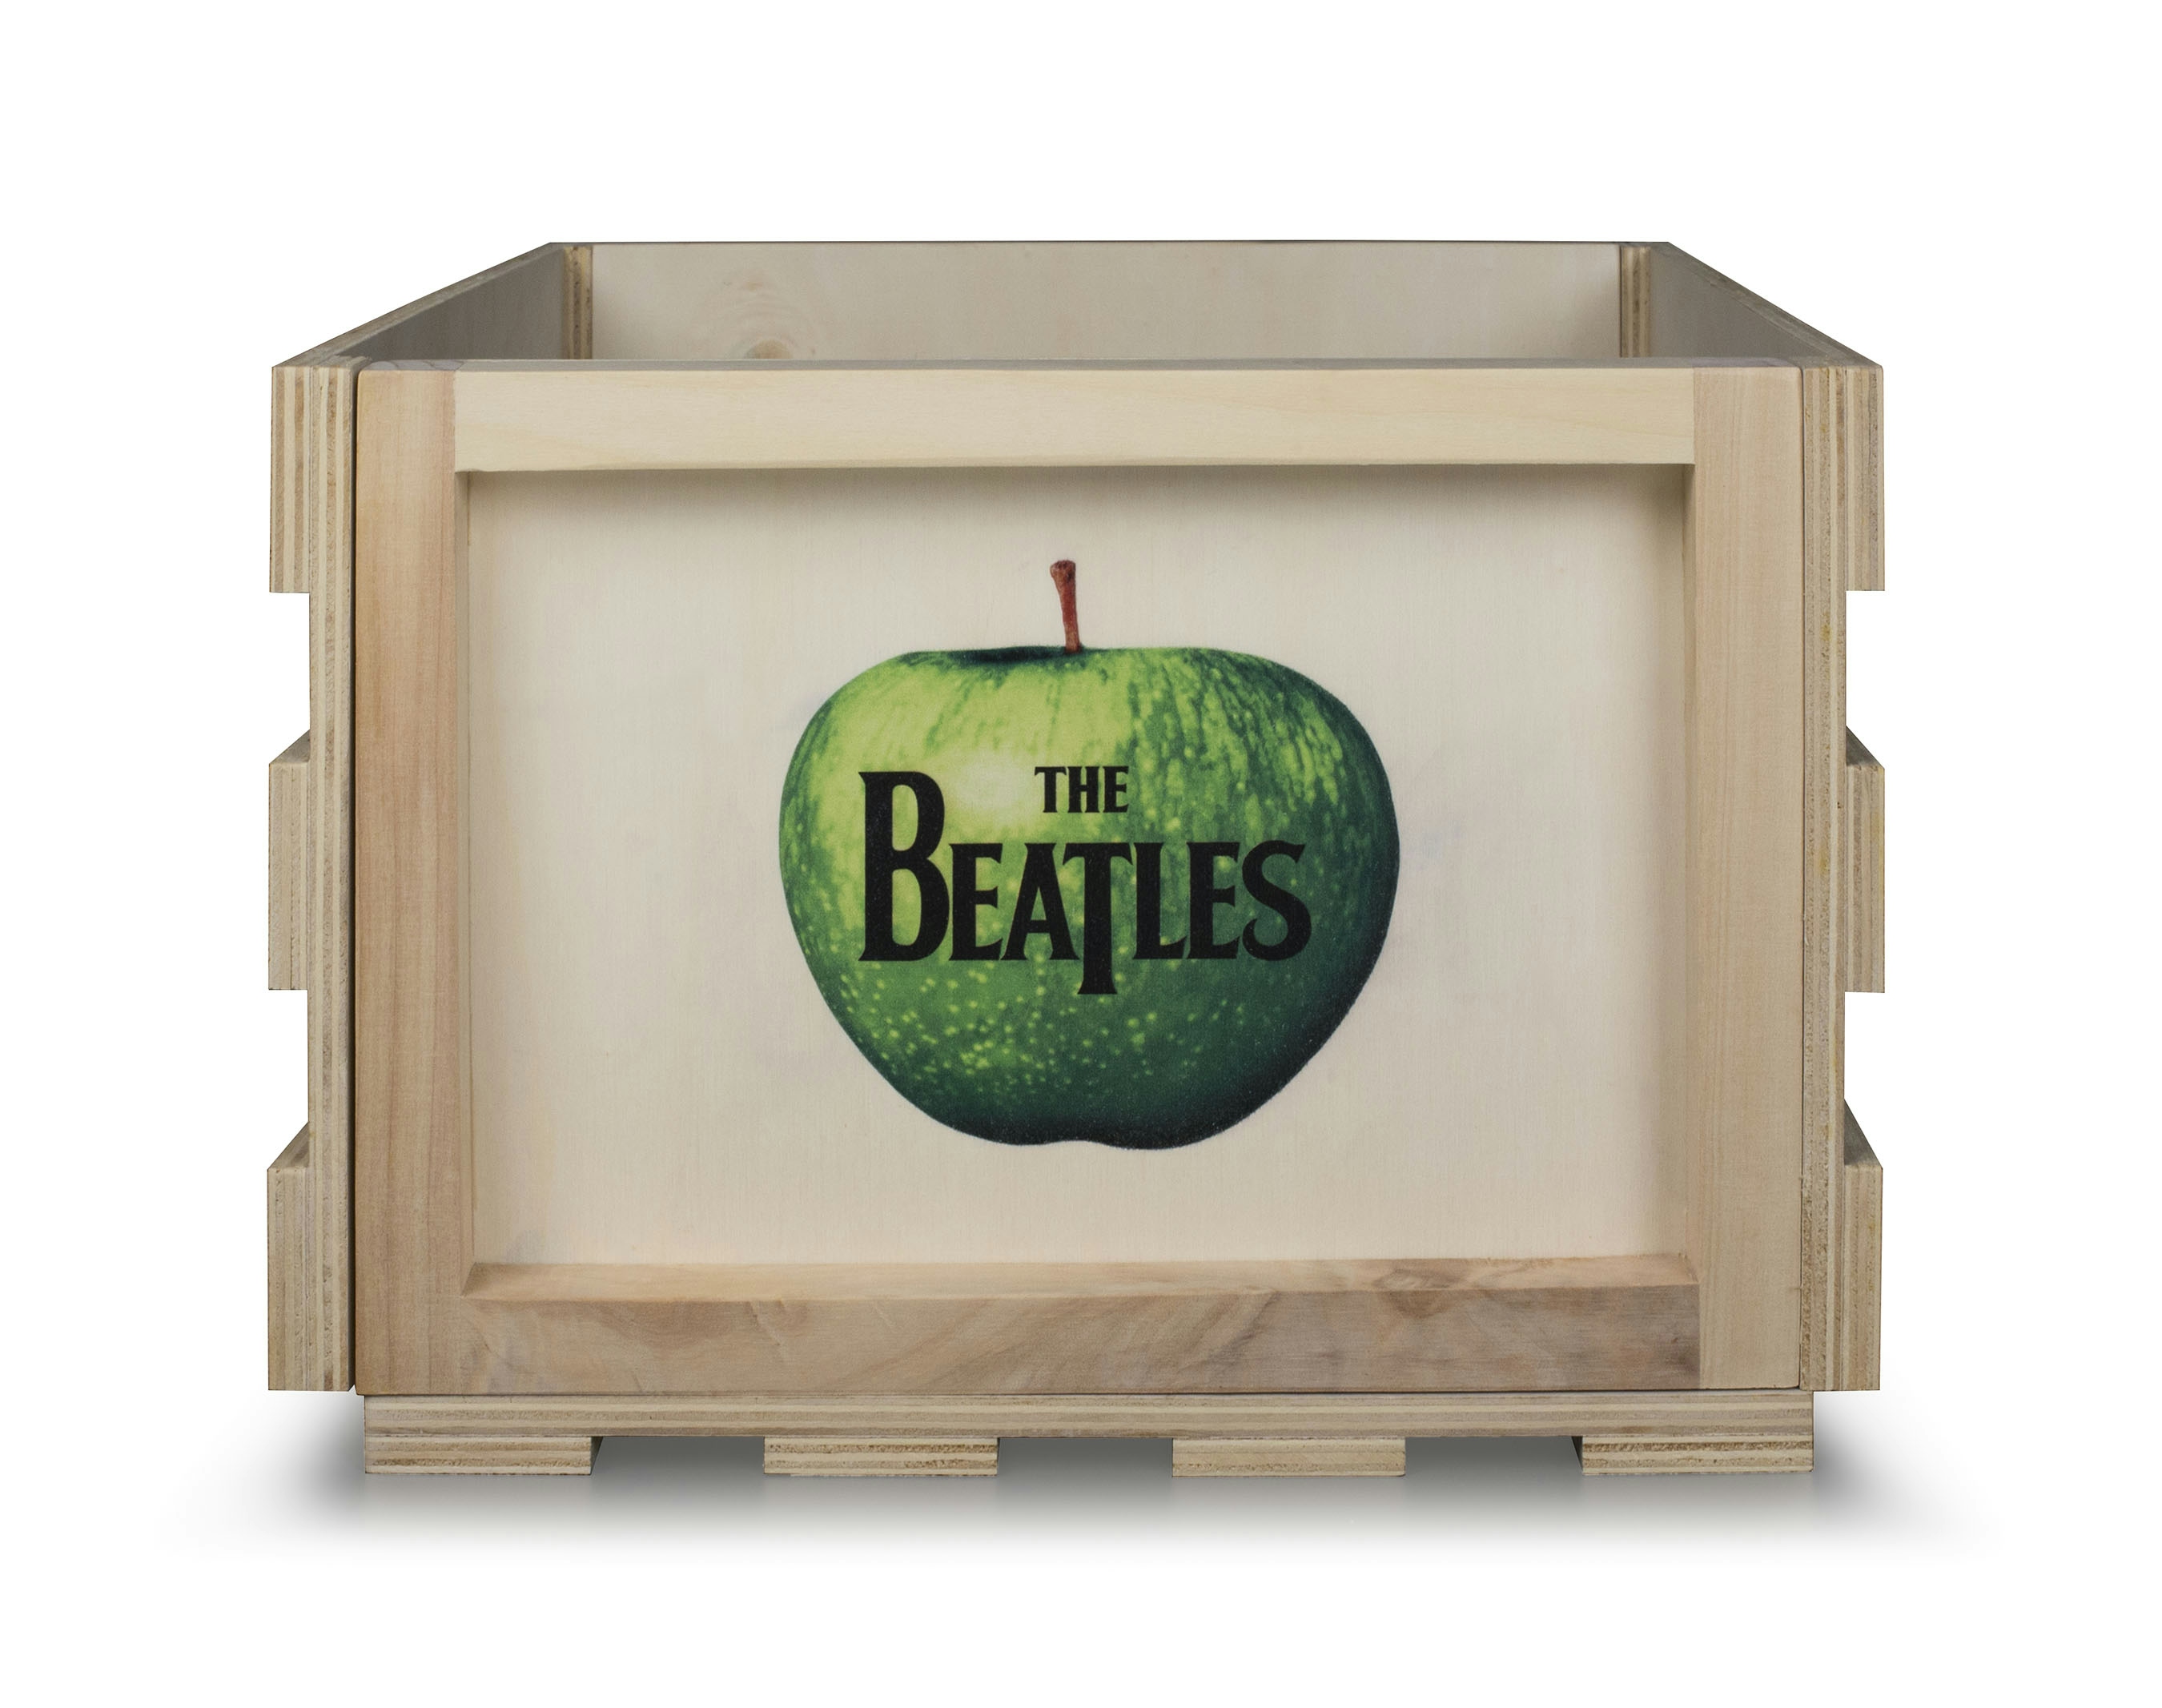 Album artwork for Album artwork for The Beatles Apple Vinyl Storage Crate by The Beatles by The Beatles Apple Vinyl Storage Crate - The Beatles